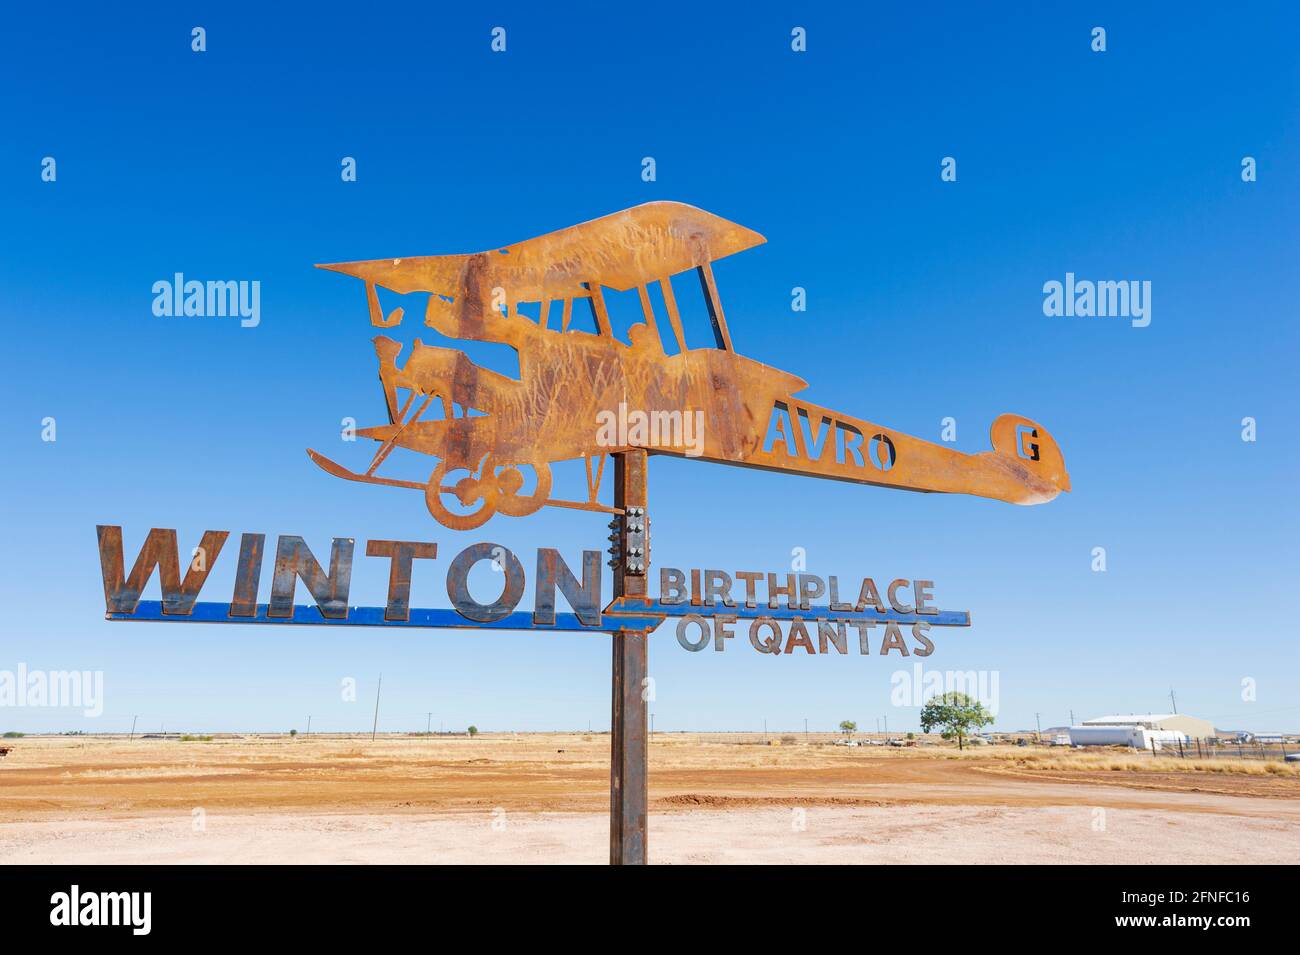 Cut-out of a plane commemorating the birthplace of Qantas in Winton, Central Queensland, QLD, Australia. Stock Photo